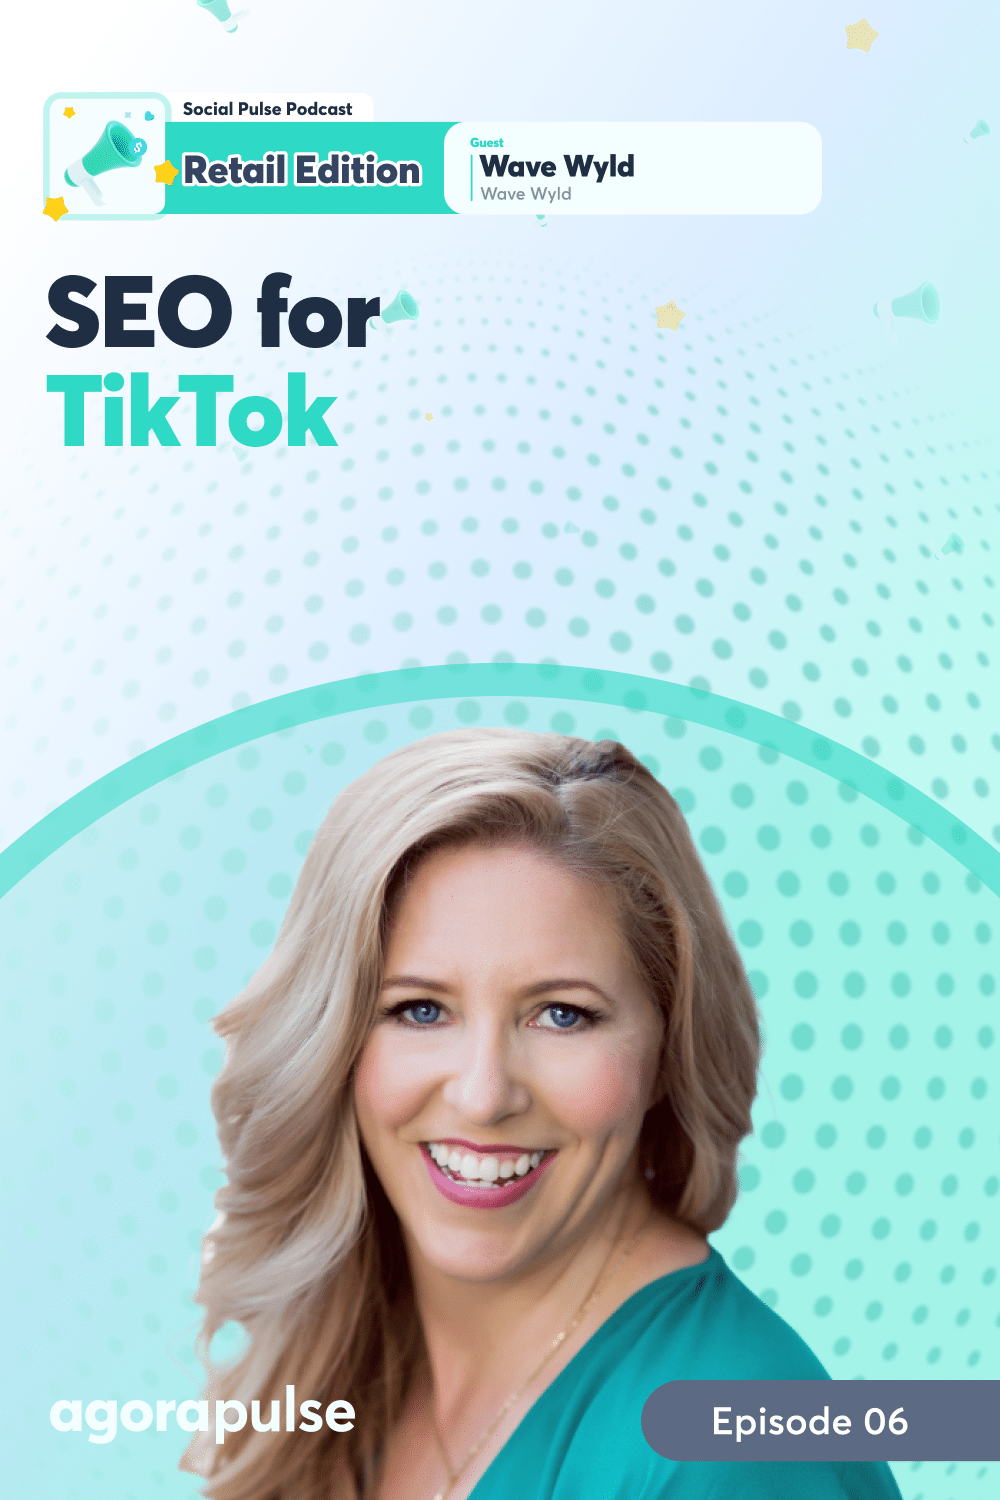 SEO for TikTok: How Social Media Managers Can Drive More Product Views